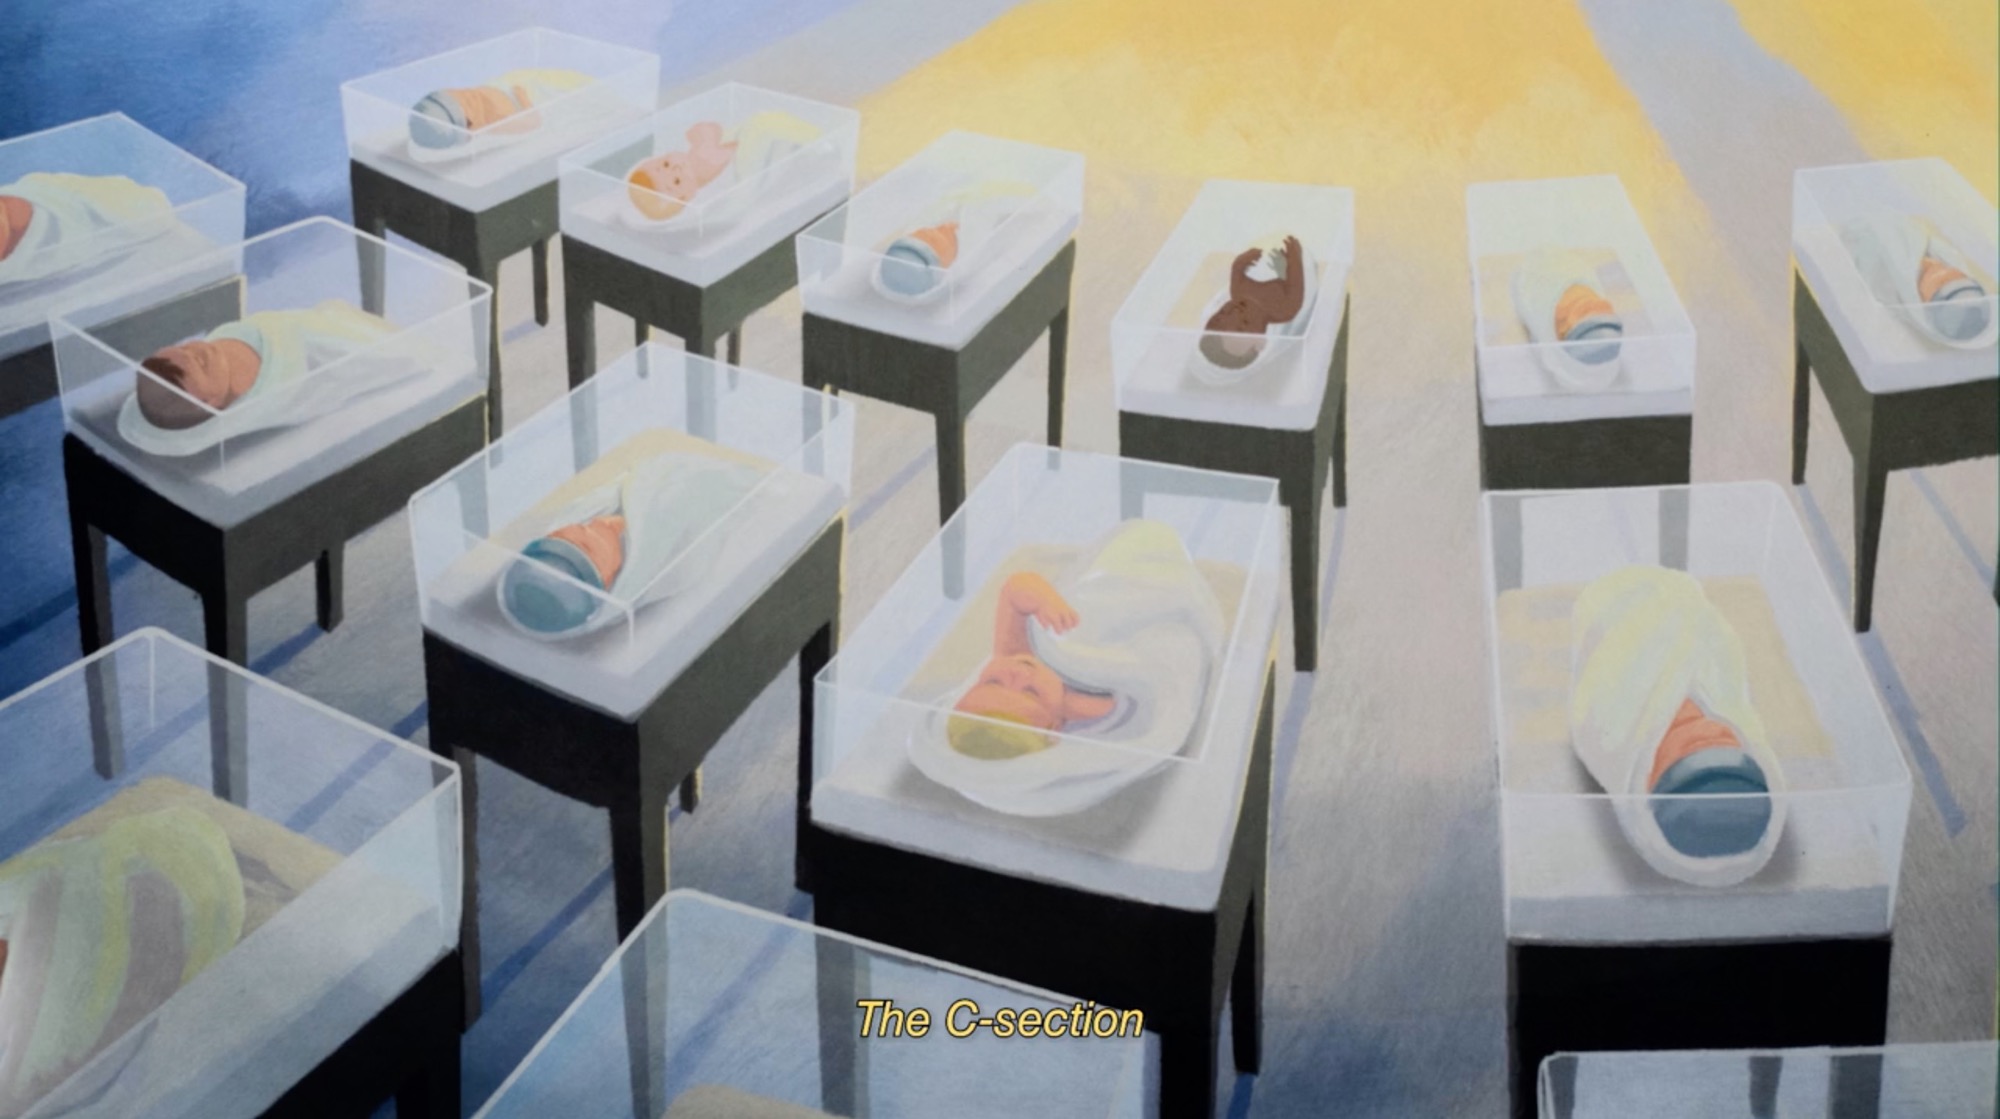 a still from a short animated film showing rows of babies in a maternity ward